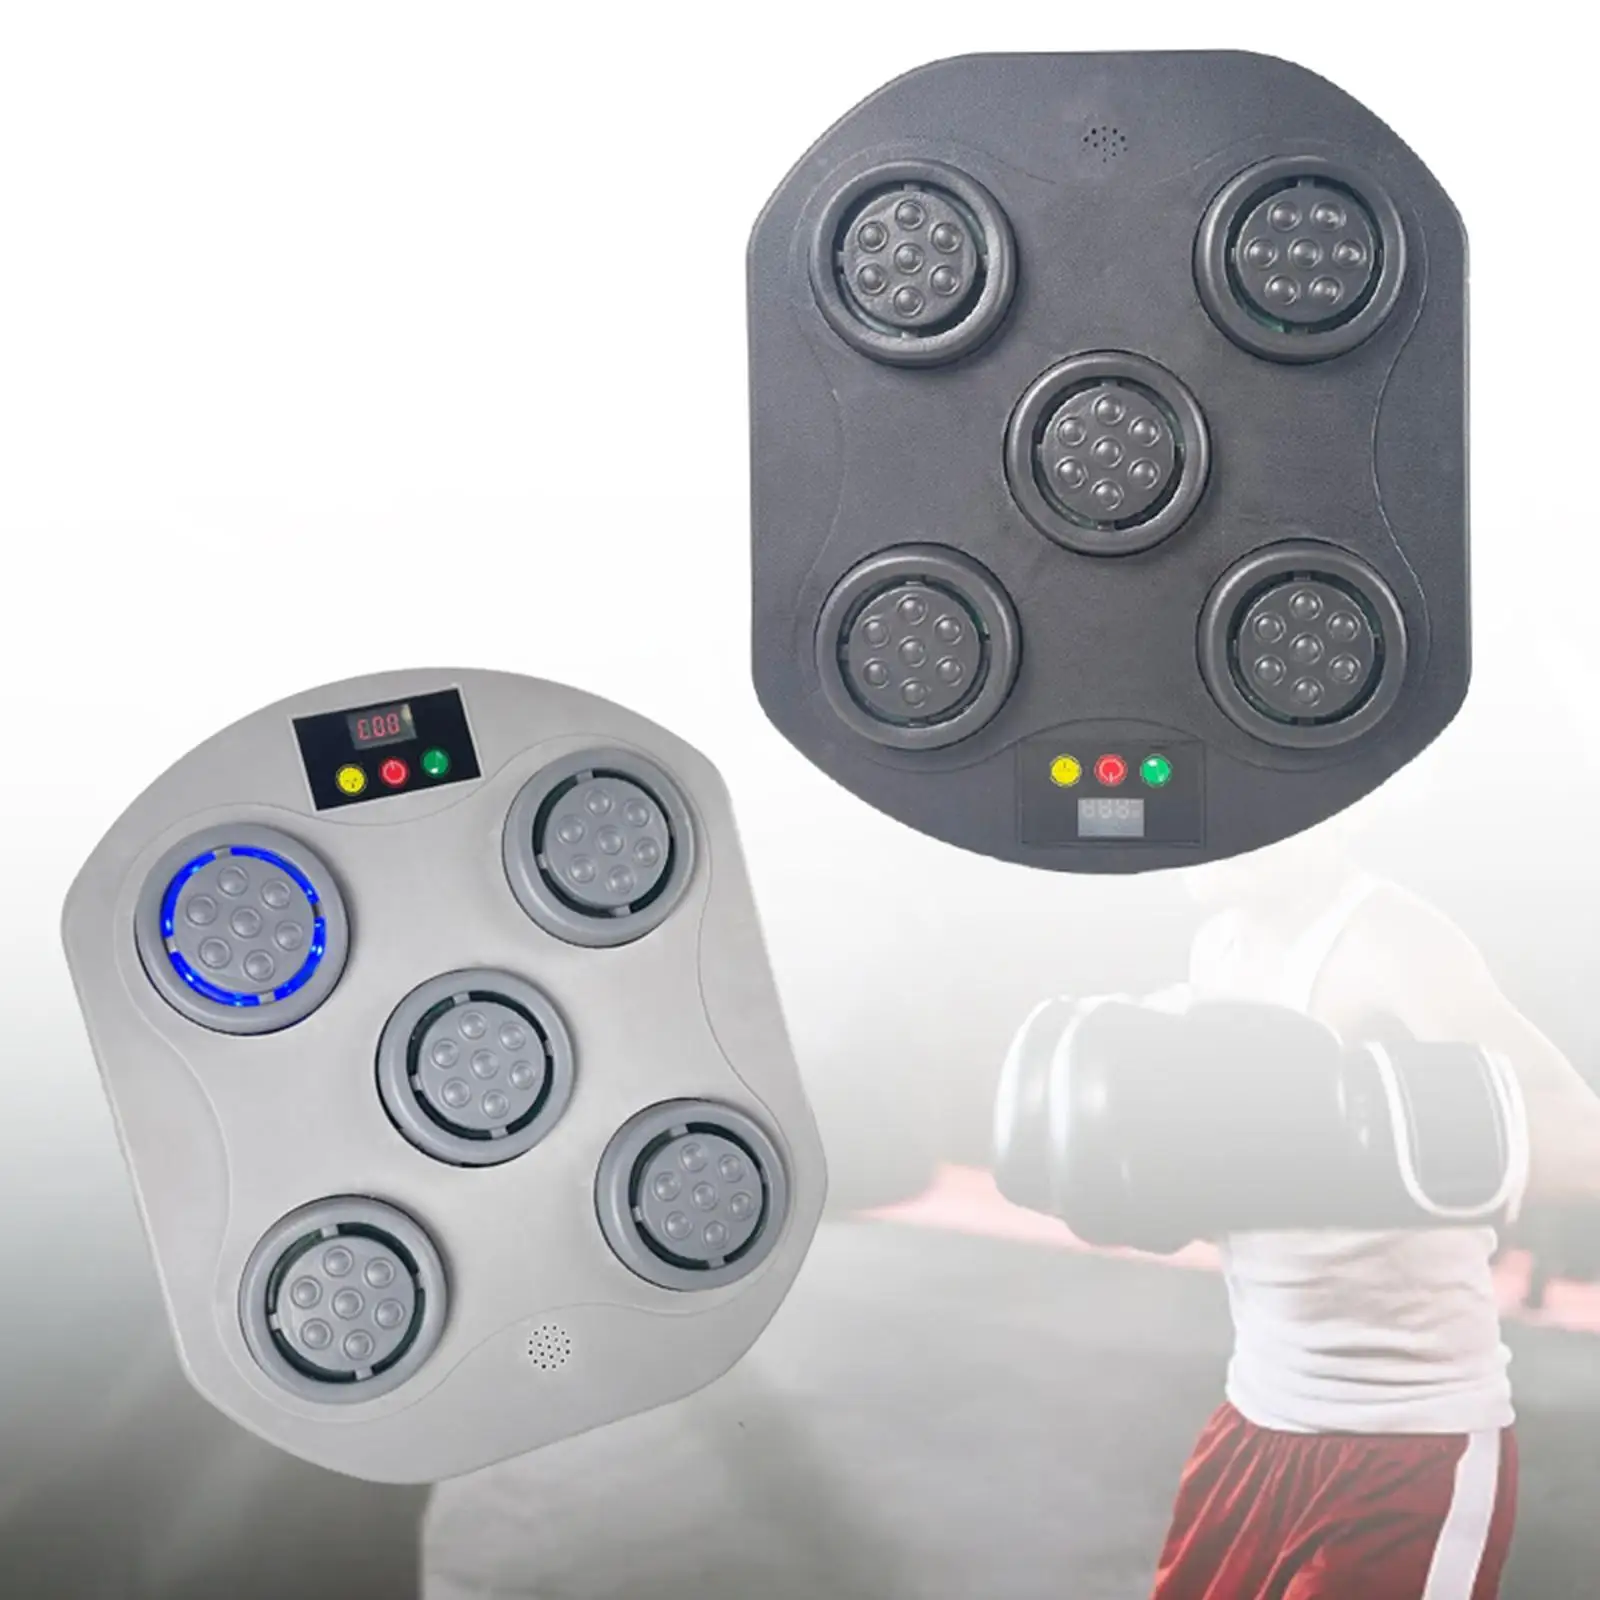 Boxing Machine Electronic Music Boxing Wall Target Rhythm Musical Target for Karate Martial Arts Speed Response Coordination